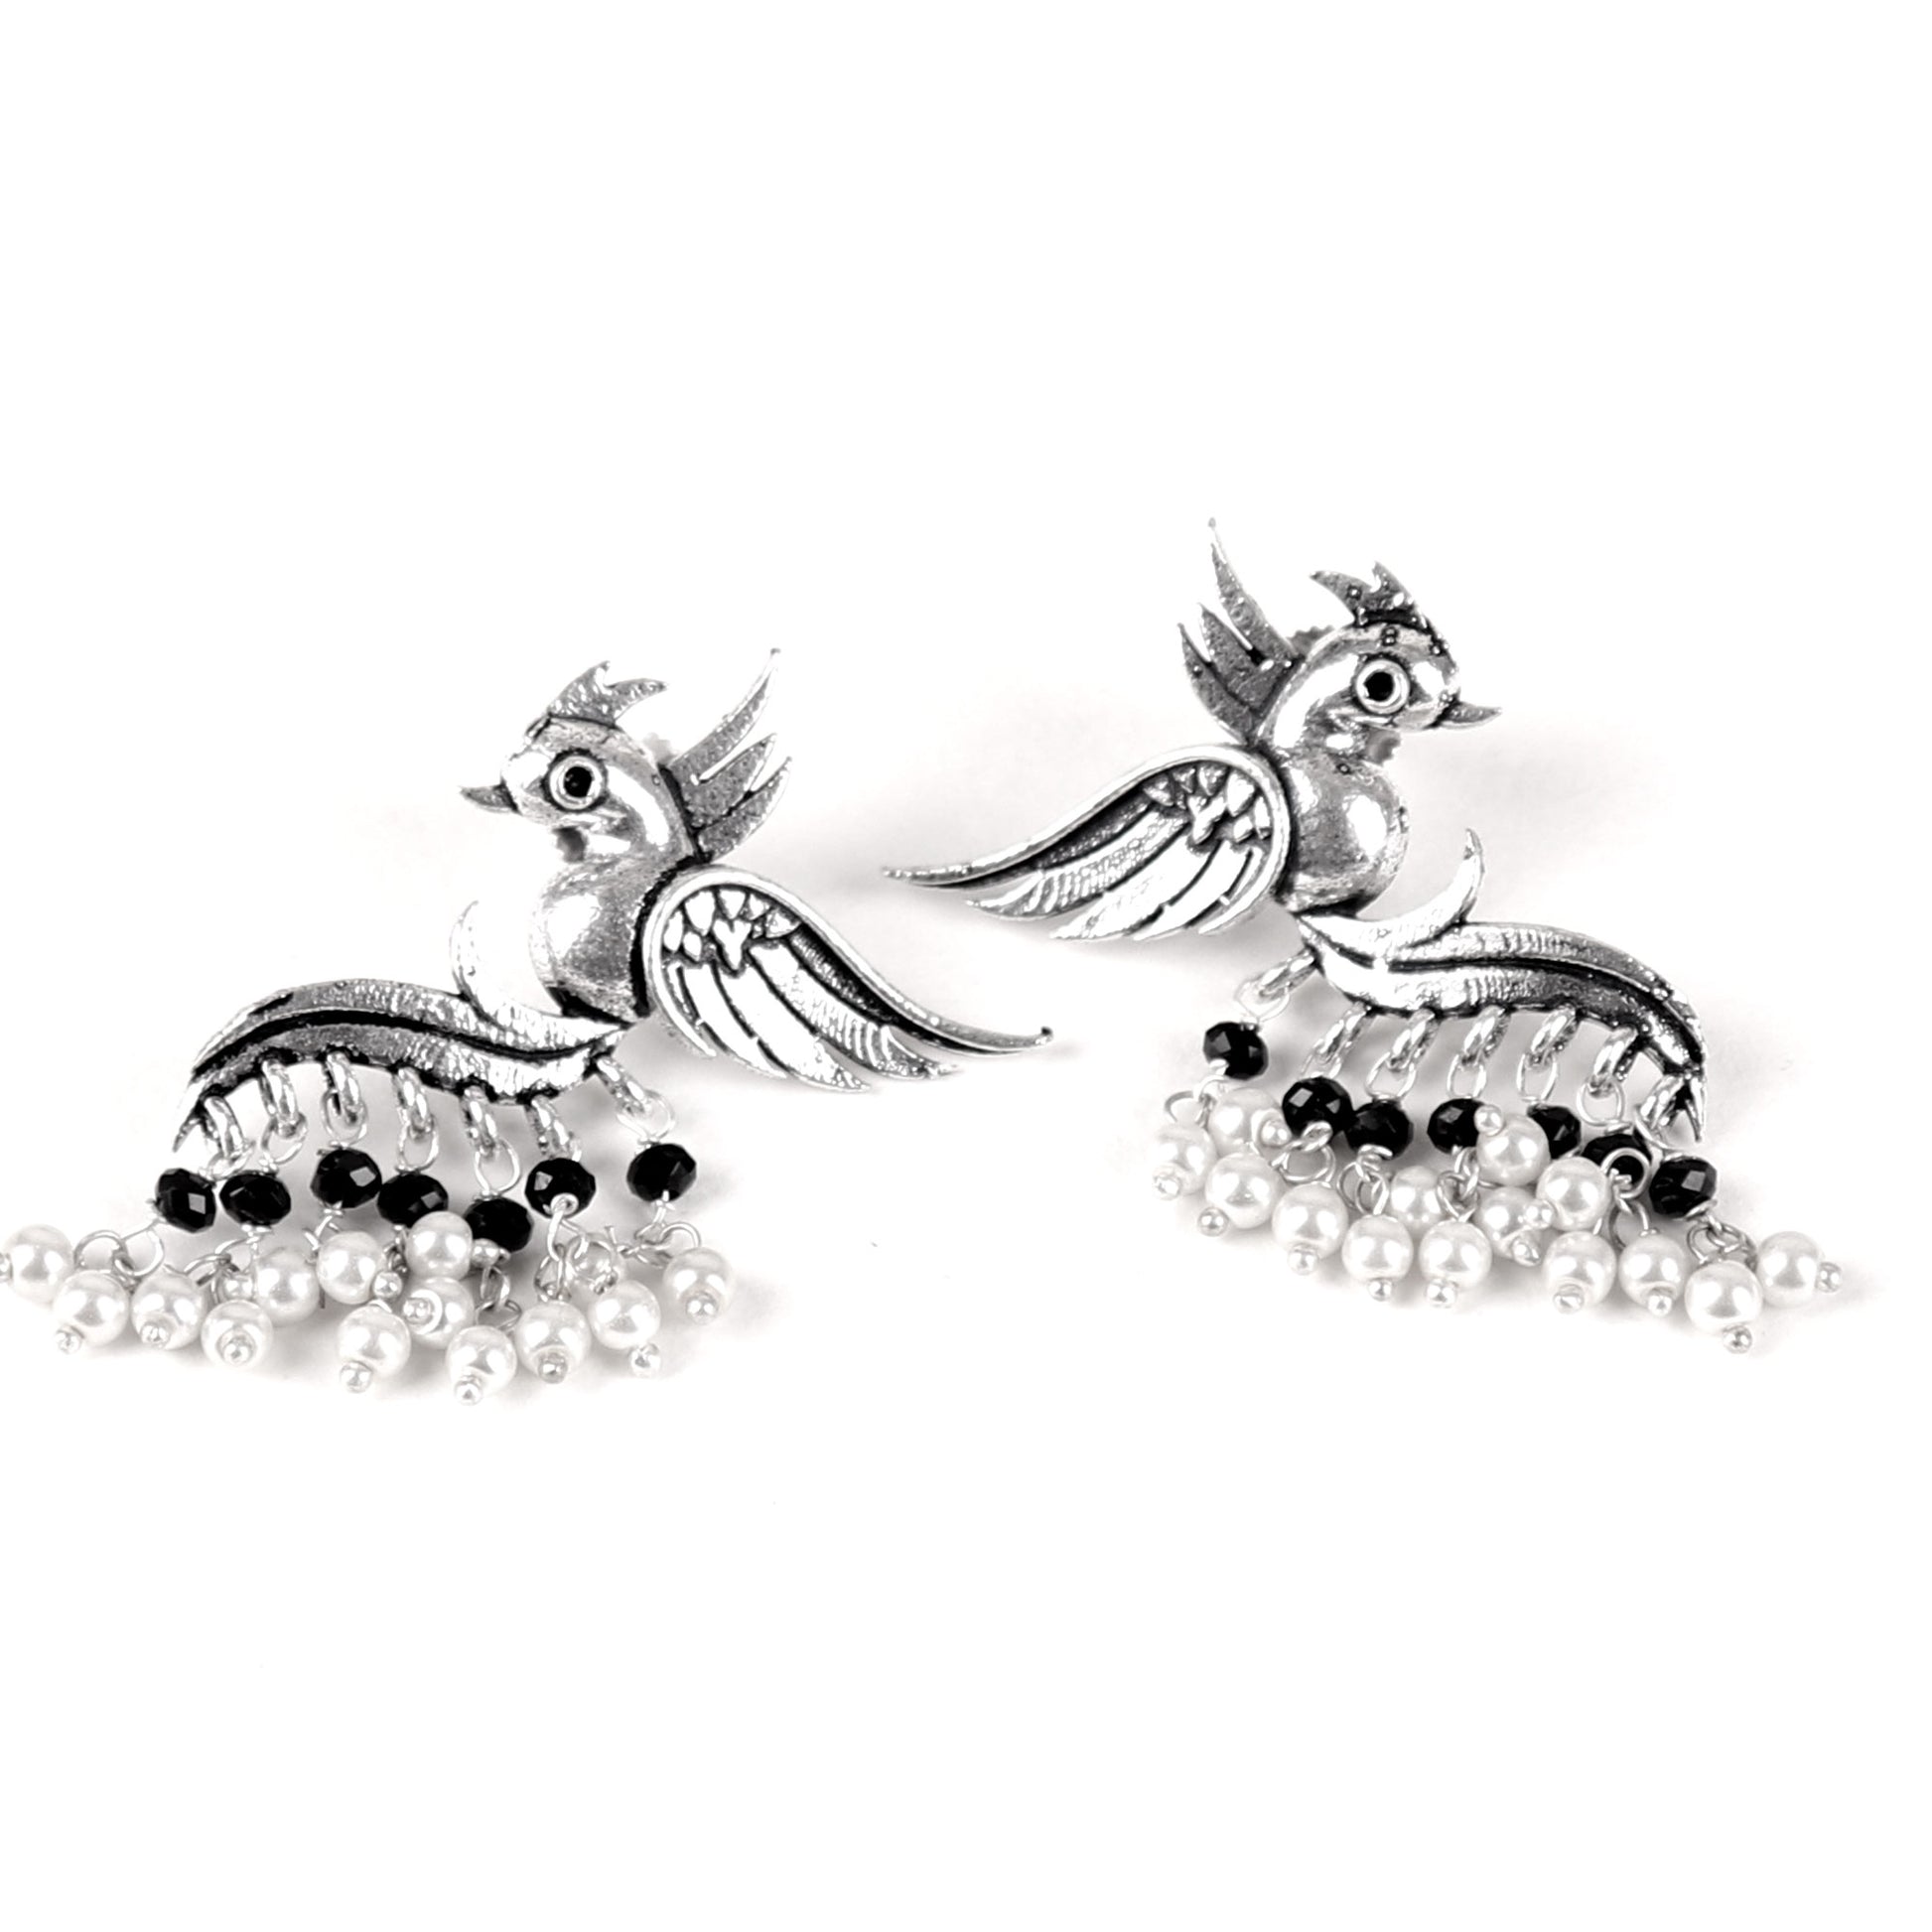 Earrings,Fly with the Bird Silver Look Alike Earring with Black & White Pearls - Cippele Multi Store